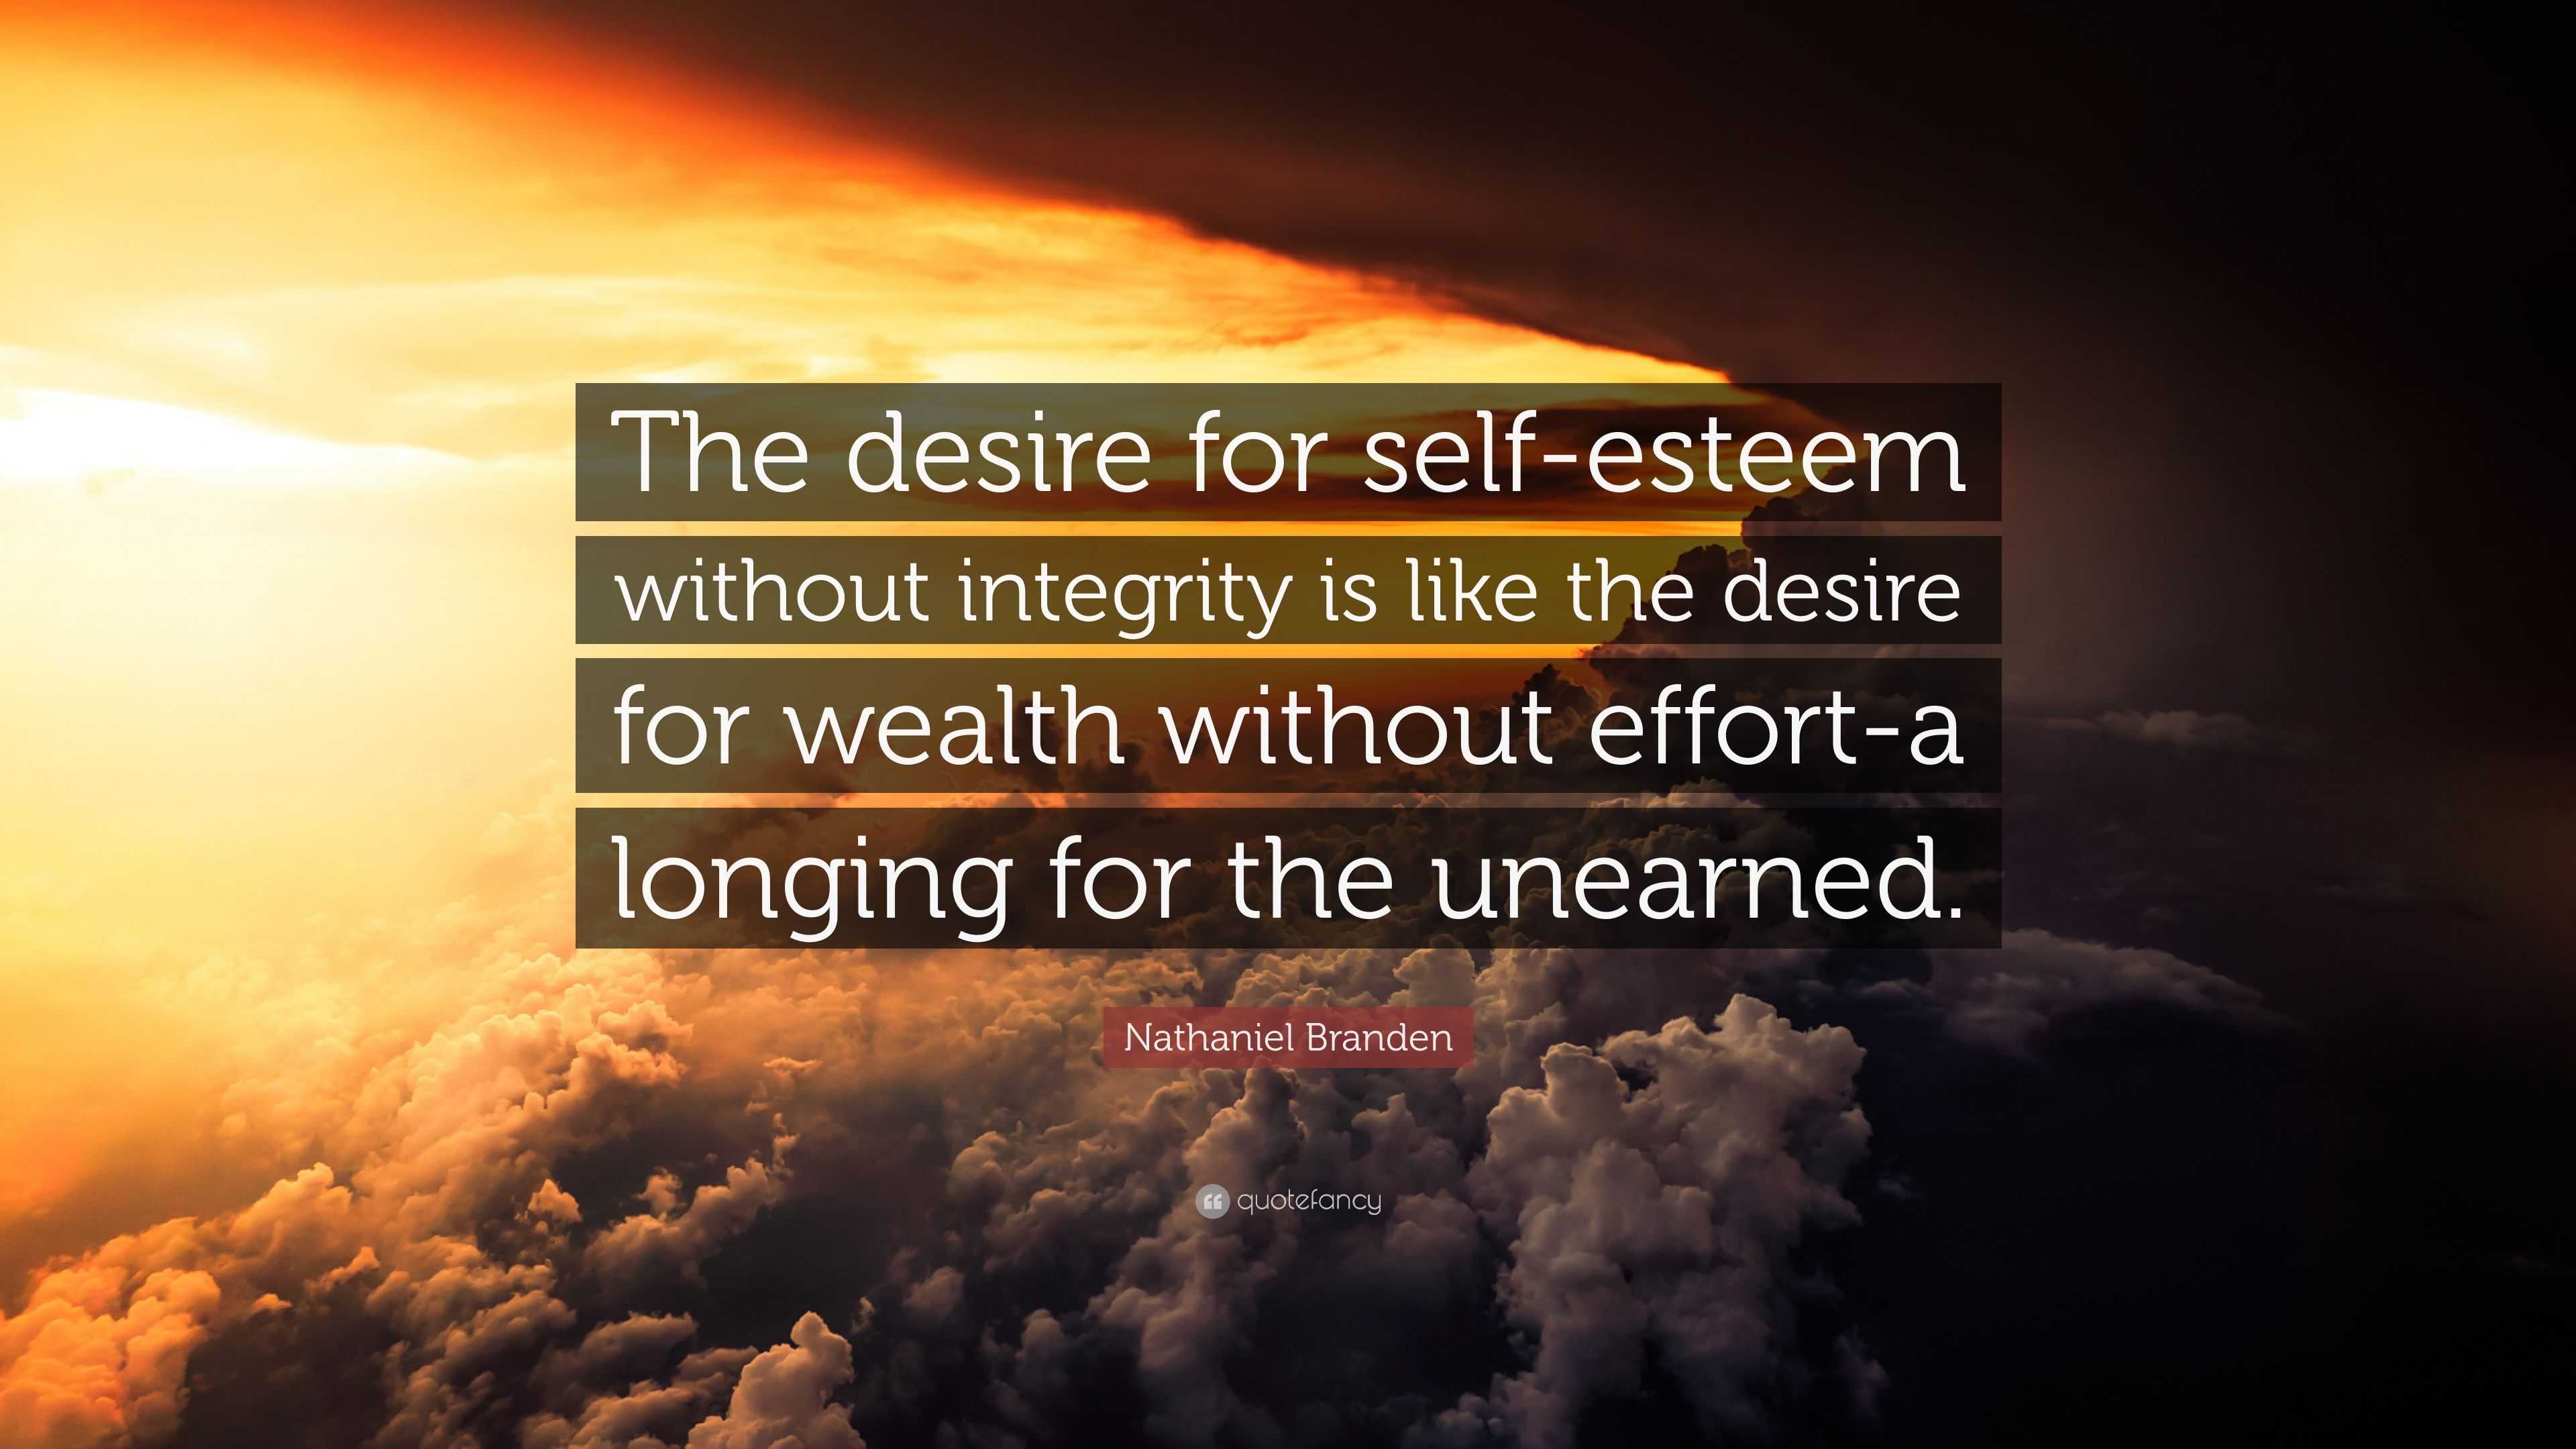 Nathaniel Branden Quote: “The desire for self-esteem without integrity ...